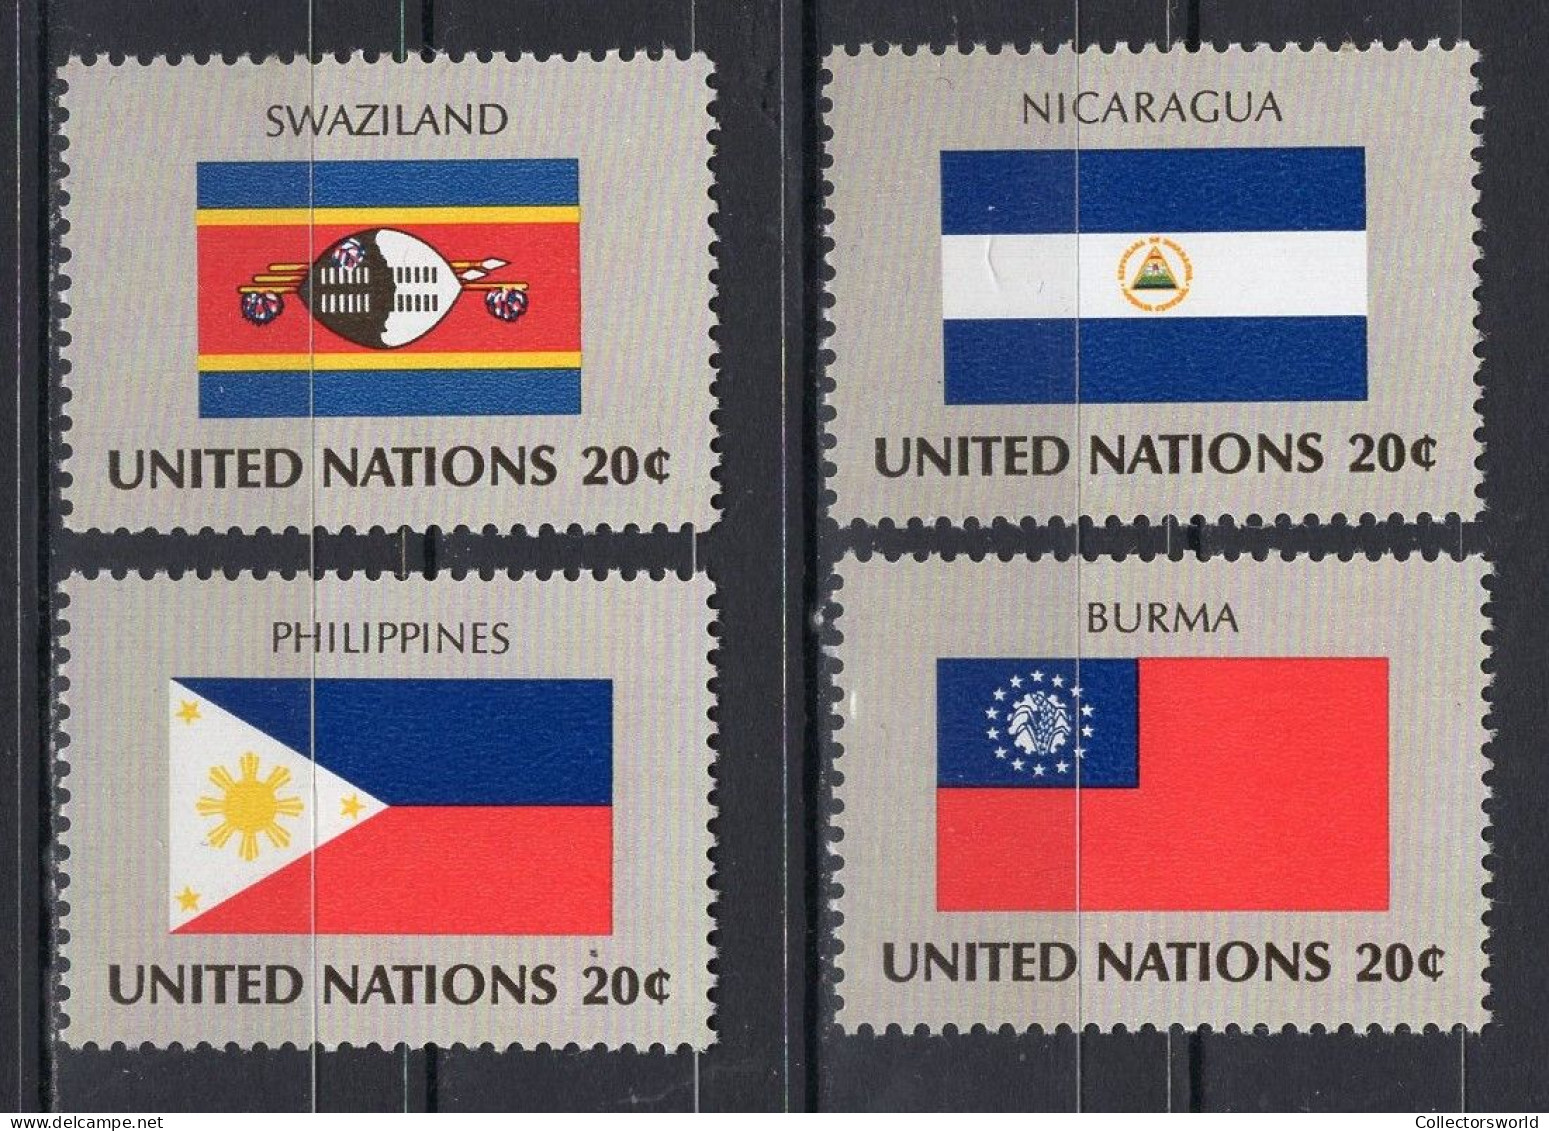 United Nations UN New York Serie 4v 1982 Flag Serie Philippines Swaziland Nicaragua MNH - Nuevos